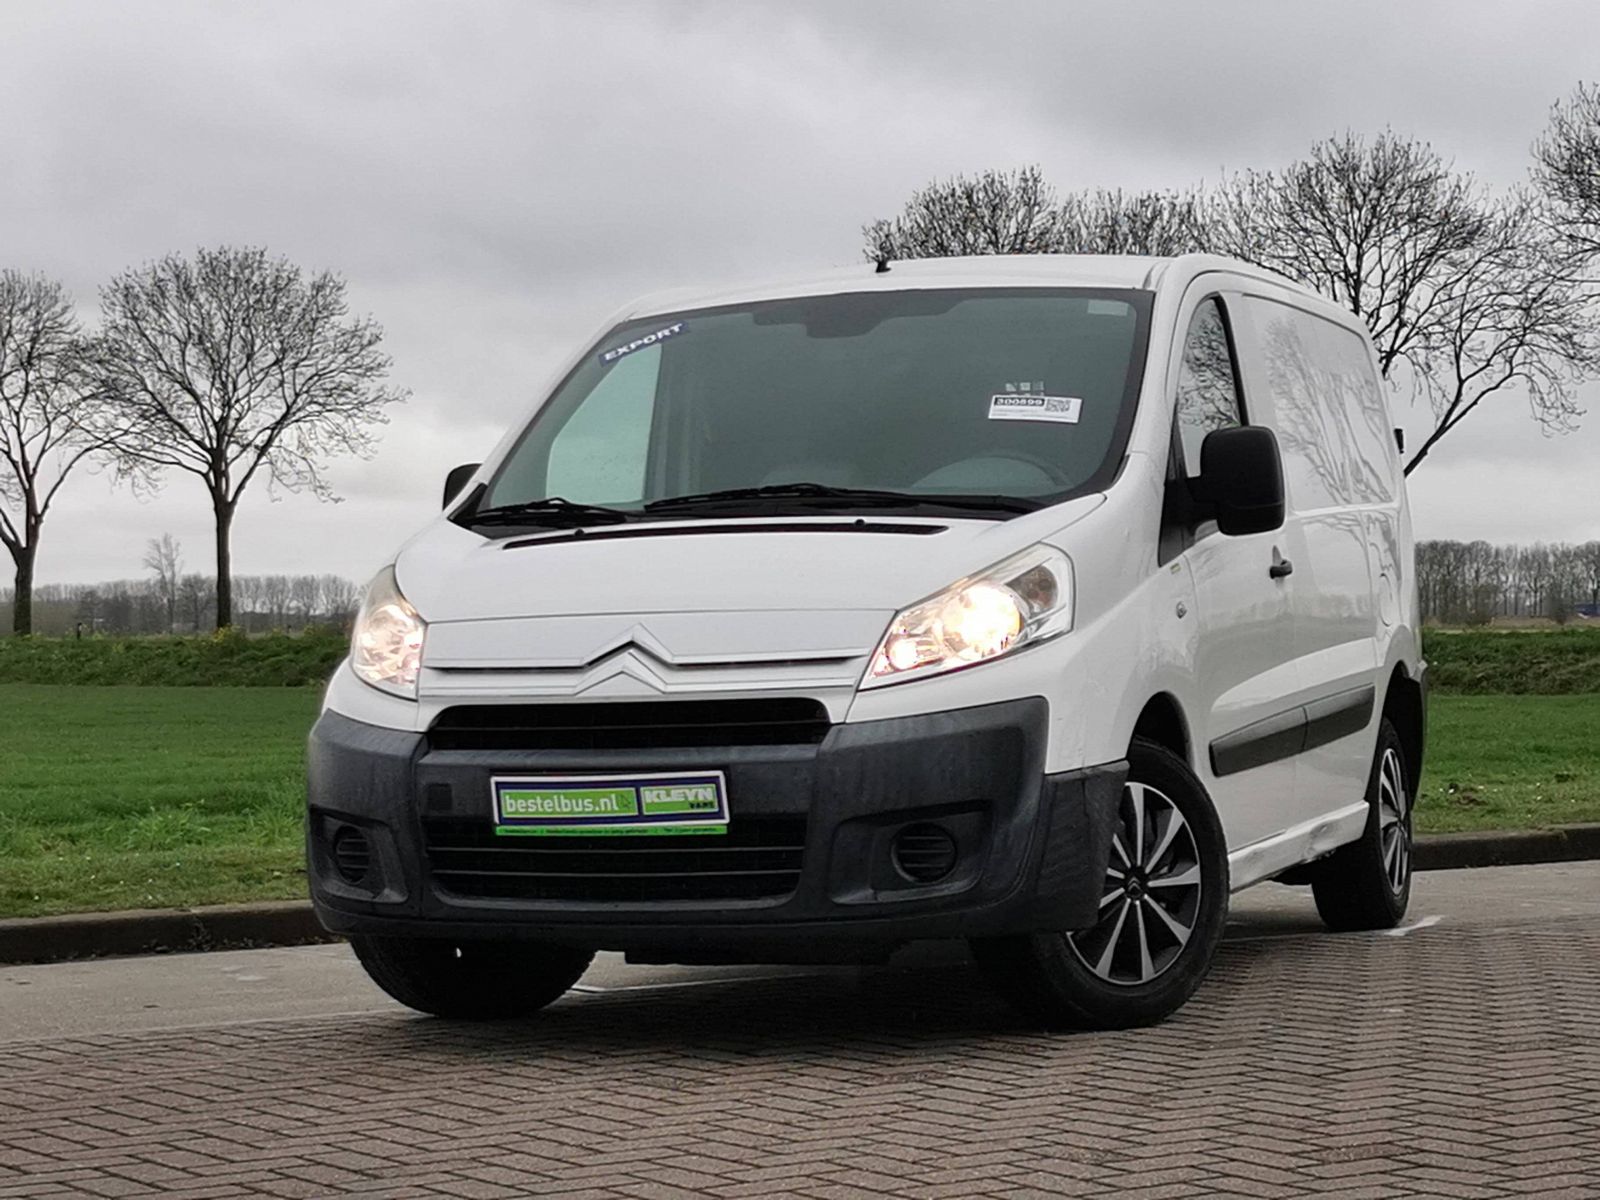 ② LEASING CITROËN JUMPY 2.0 HDI - DOUBLE CABINE — Camionnettes